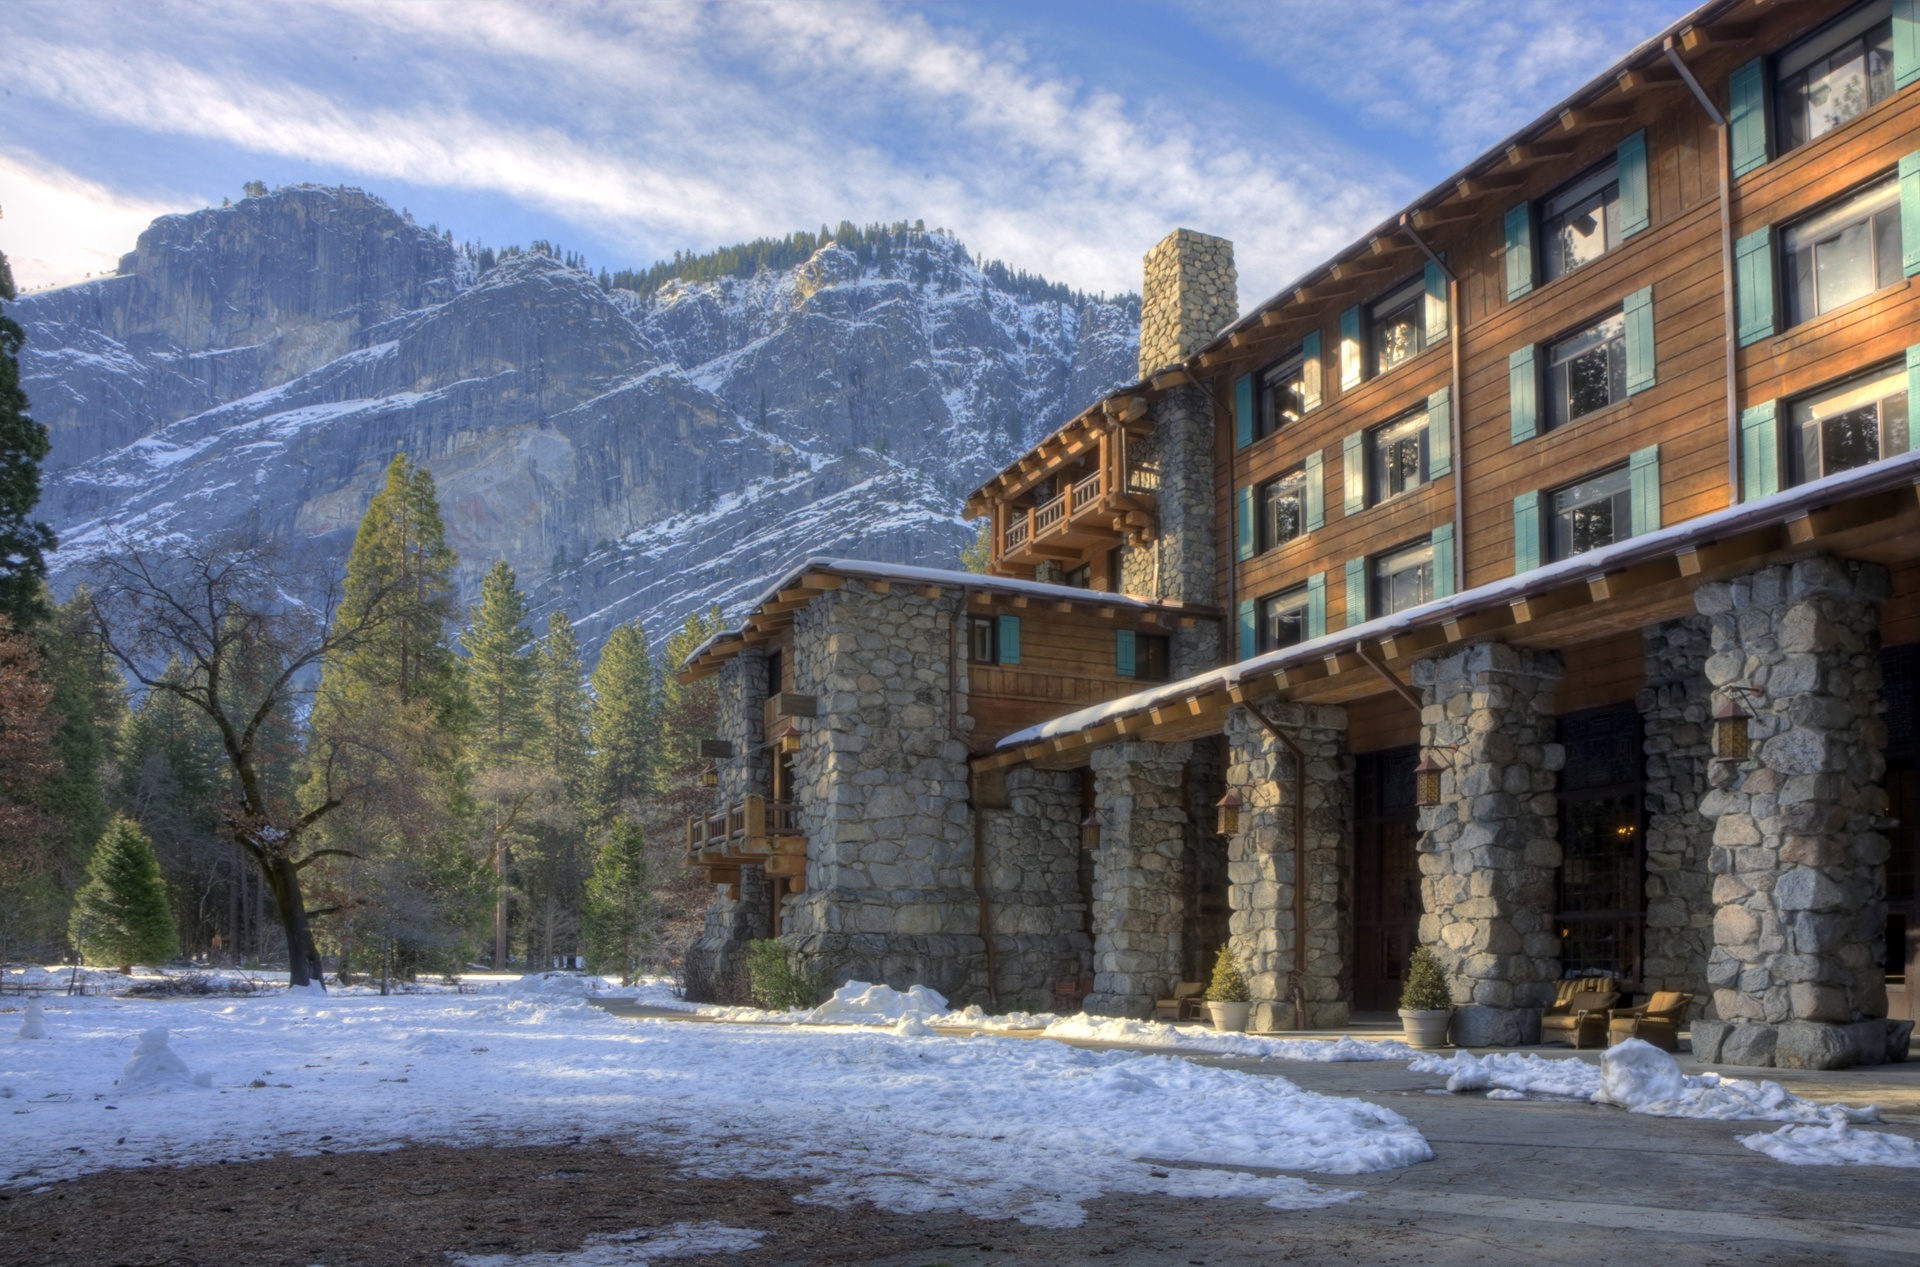 The Ahwahnee - Architectural Preservation, Renovation - ARG